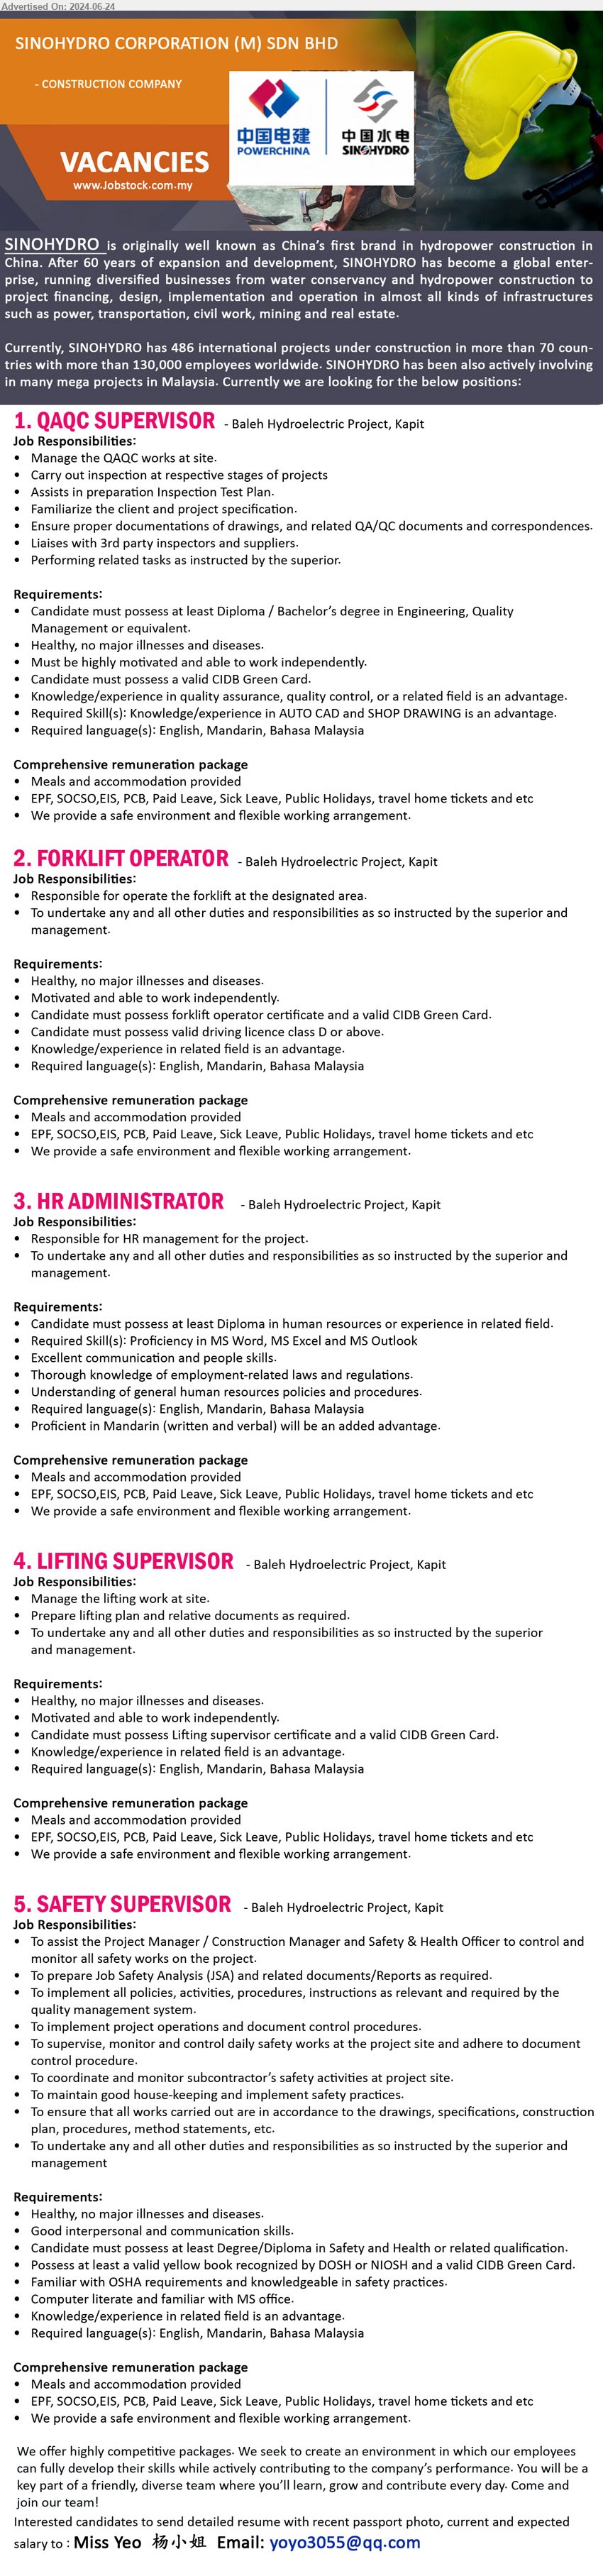 SINOHYDRO CORPORATION (M) SDN BHD - 1. QAQC SUPERVISOR (Kapit), Diploma / Bachelor’s Degree in Engineering, Quality Management,...
2. FORKLIFT OPERATOR (Kapit), possess forklift operator certificate and a valid CIDB Green Card.,...
3. HR ADMINISTRATOR (Kapit), Diploma in Human Resources or experience ,...
4. LIFTING SUPERVISOR (Kapit),  possess Lifting supervisor certificate and a valid CIDB Green Card.,...
5. SAFETY SUPERVISOR (Kapit), Degree/Diploma in Safety and Health,...
Email resume to ...